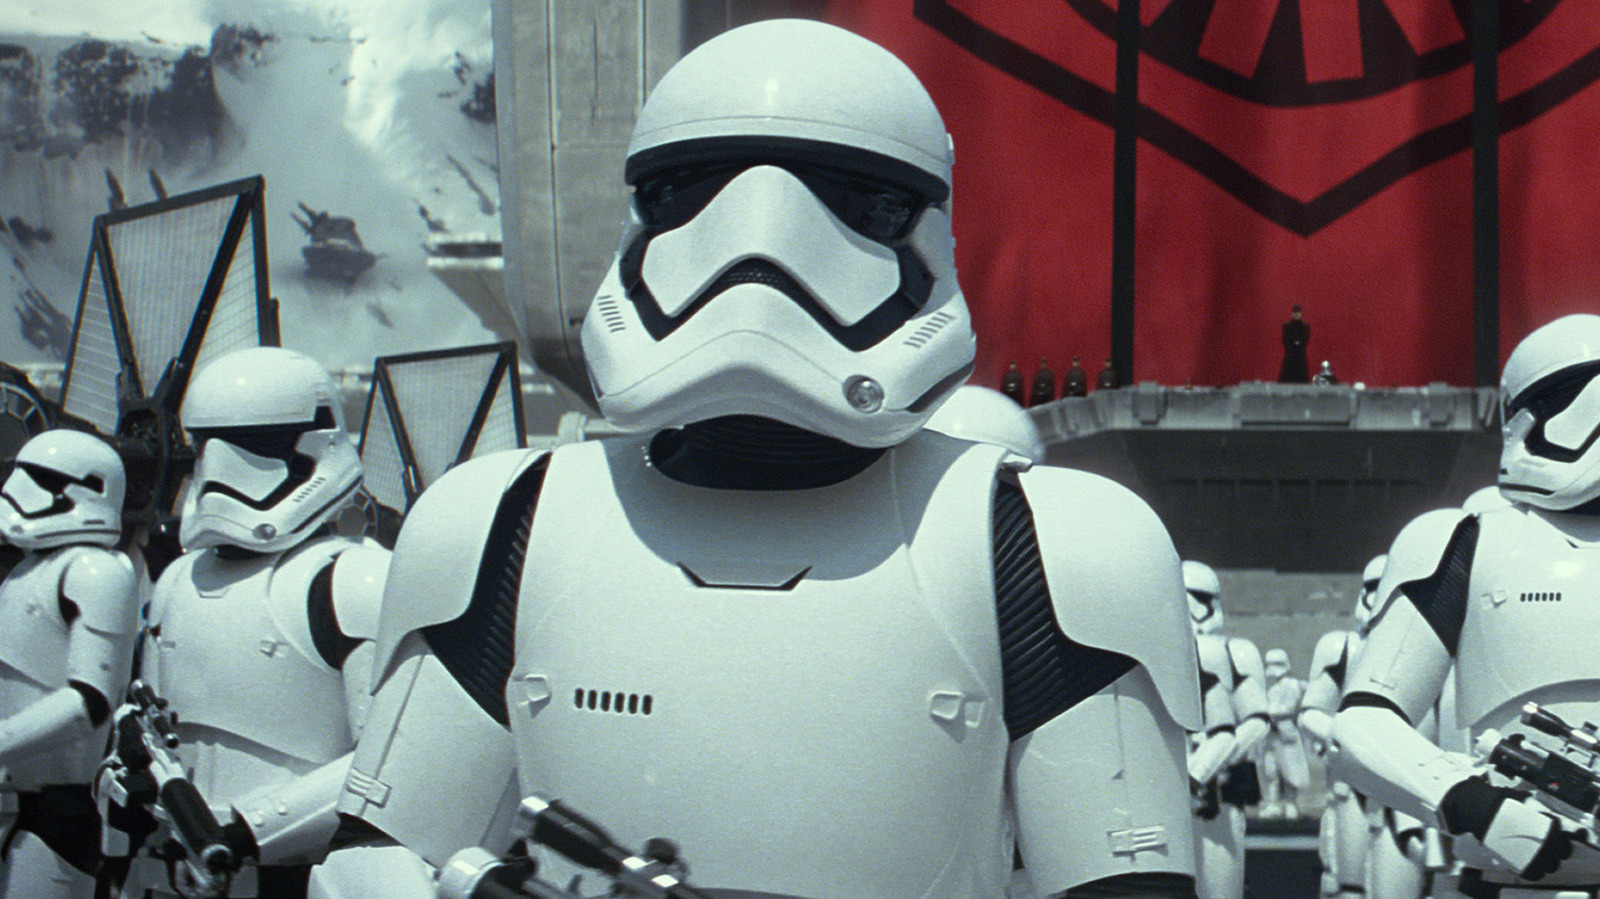 catalina padua recommends Images Of Stormtroopers